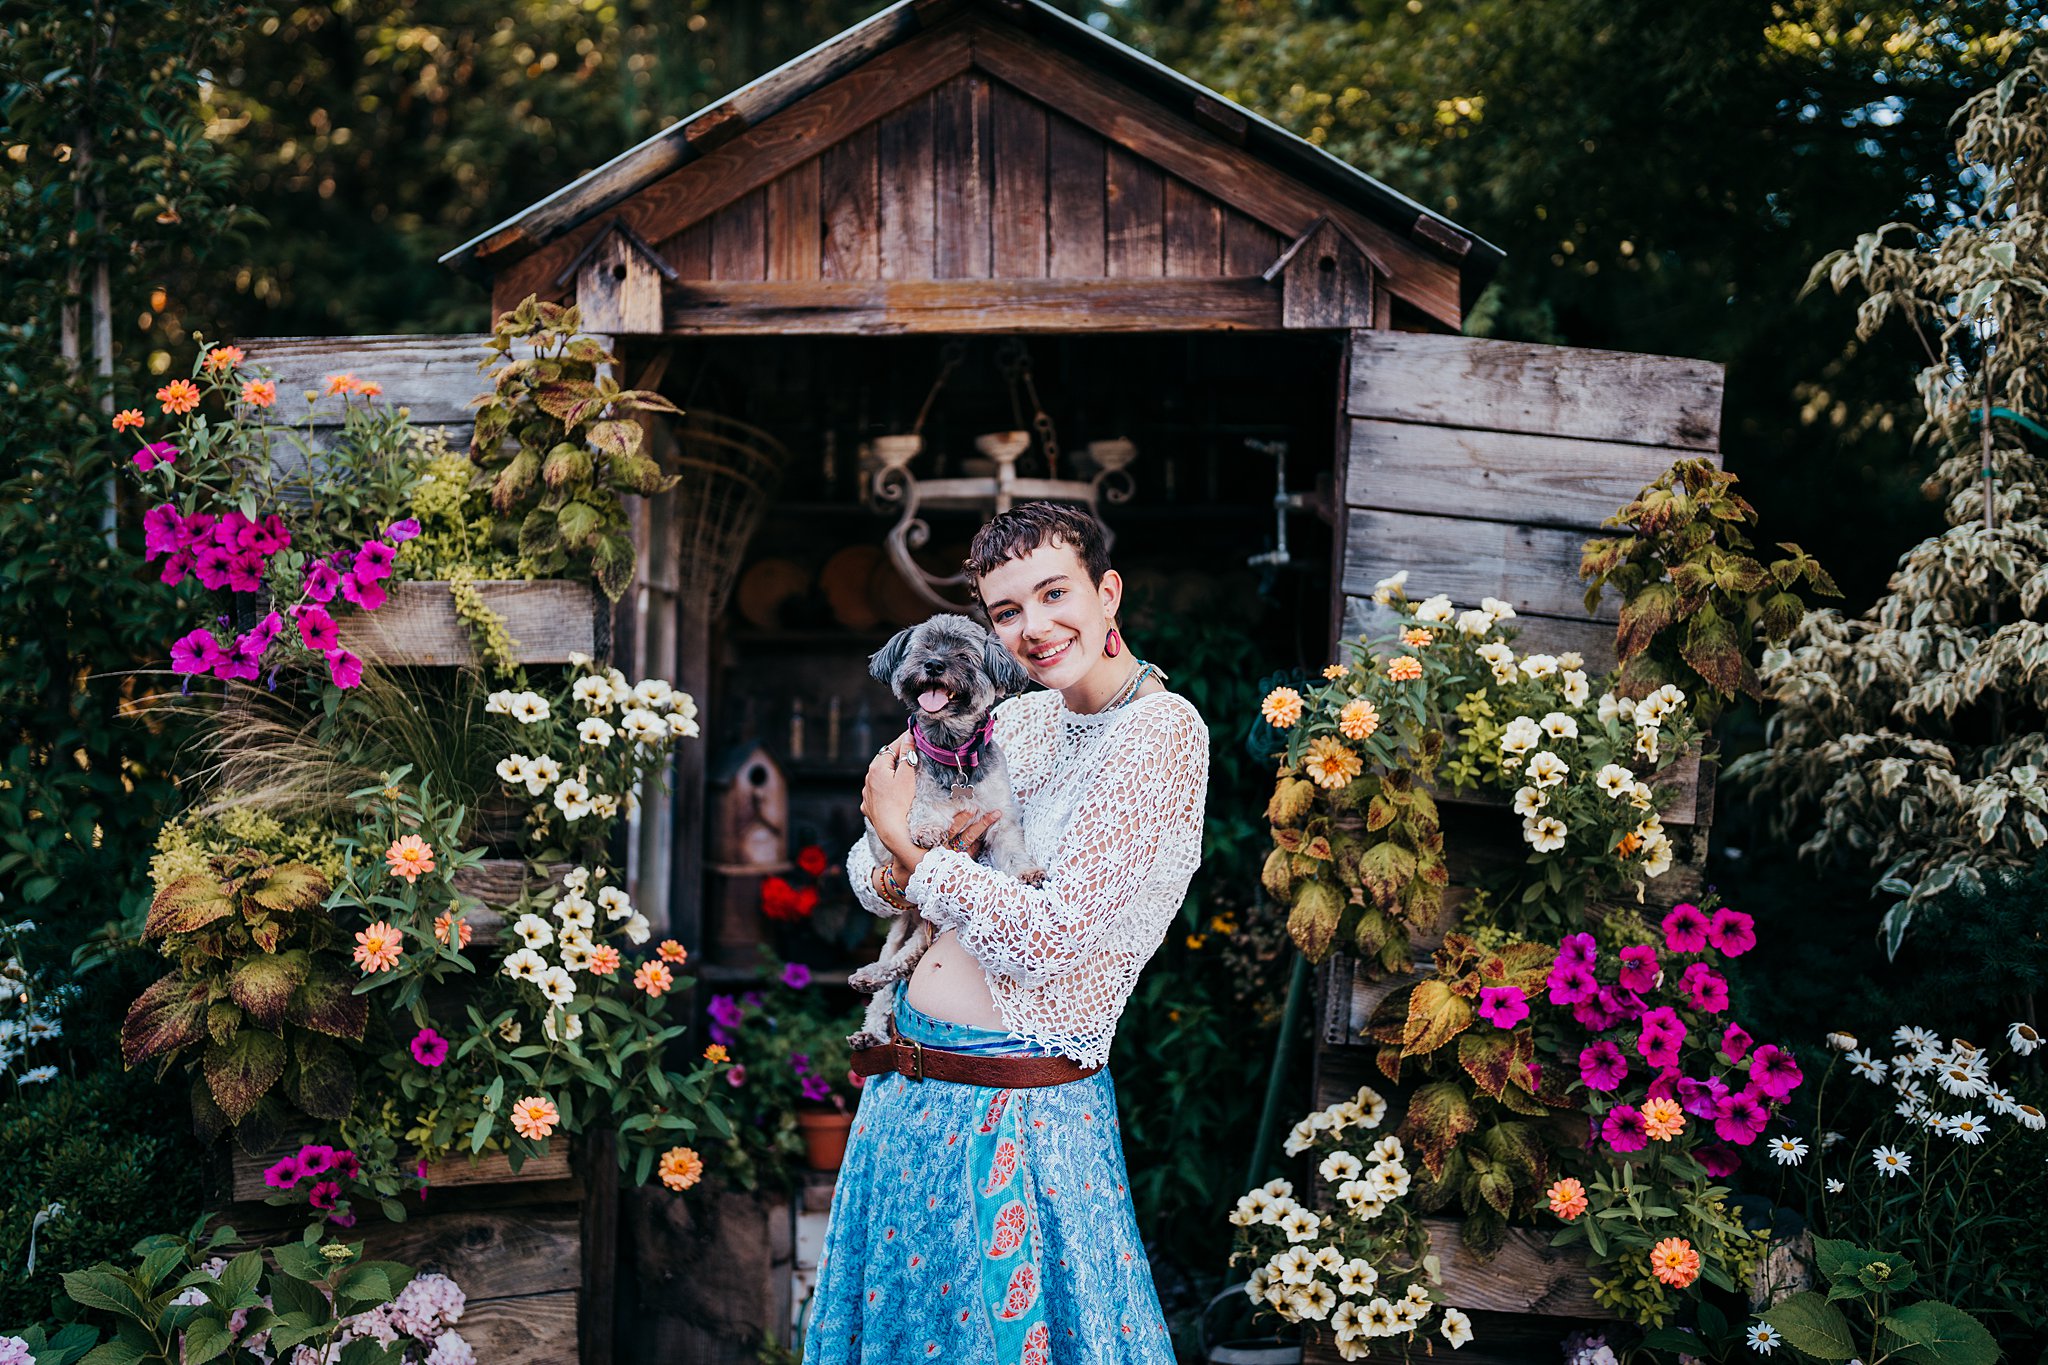 A woman in a blue dress and white top stands in front of a garden shed holding a small puppy Seattle Photoshoot Locations